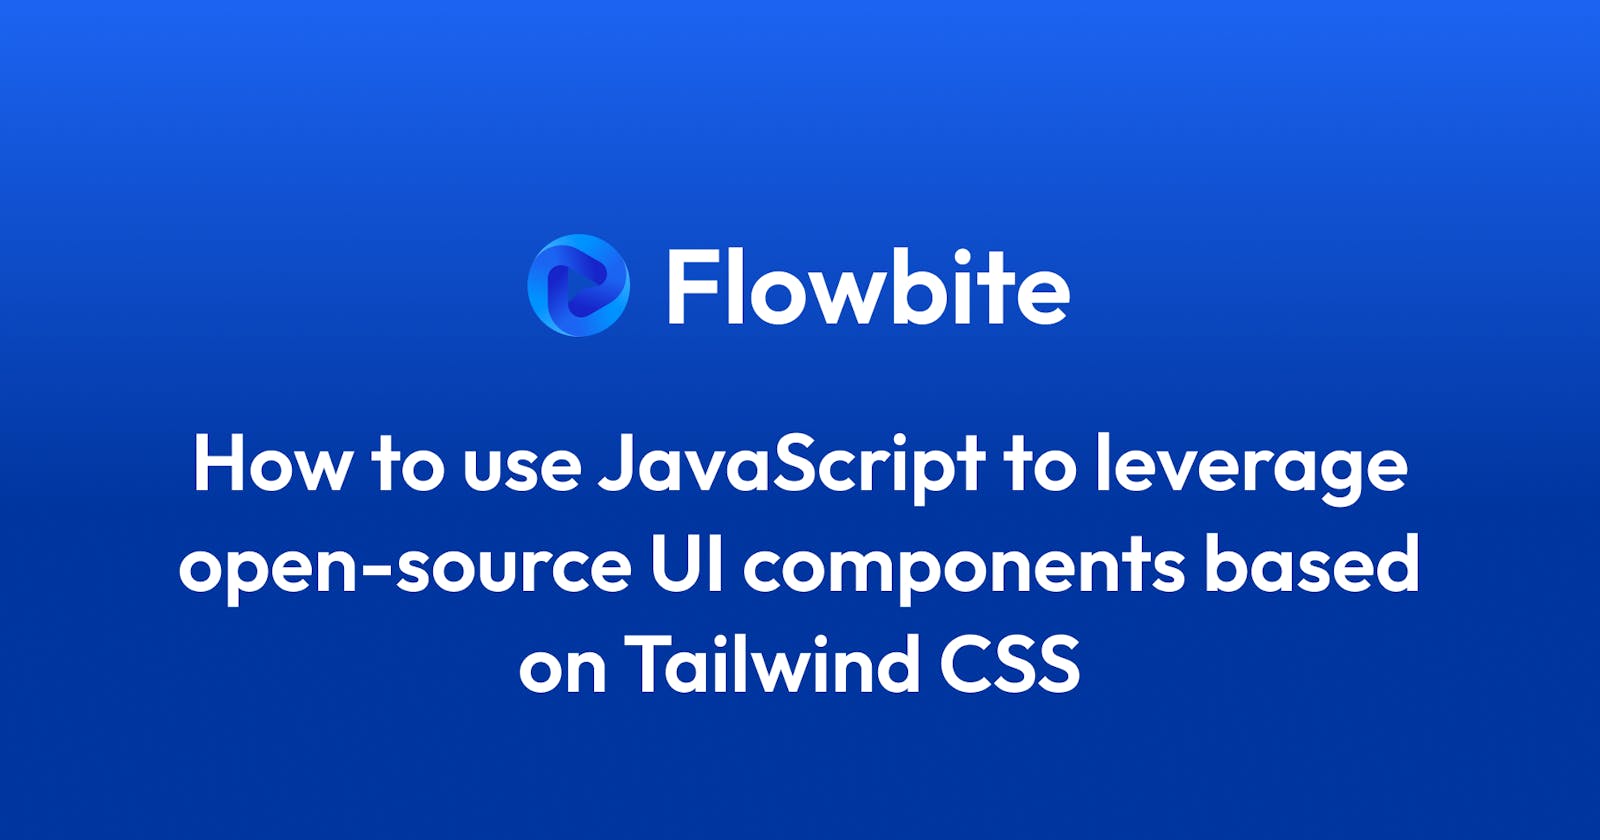 Learn how to use JavaScript to power UI components based on Tailwind CSS